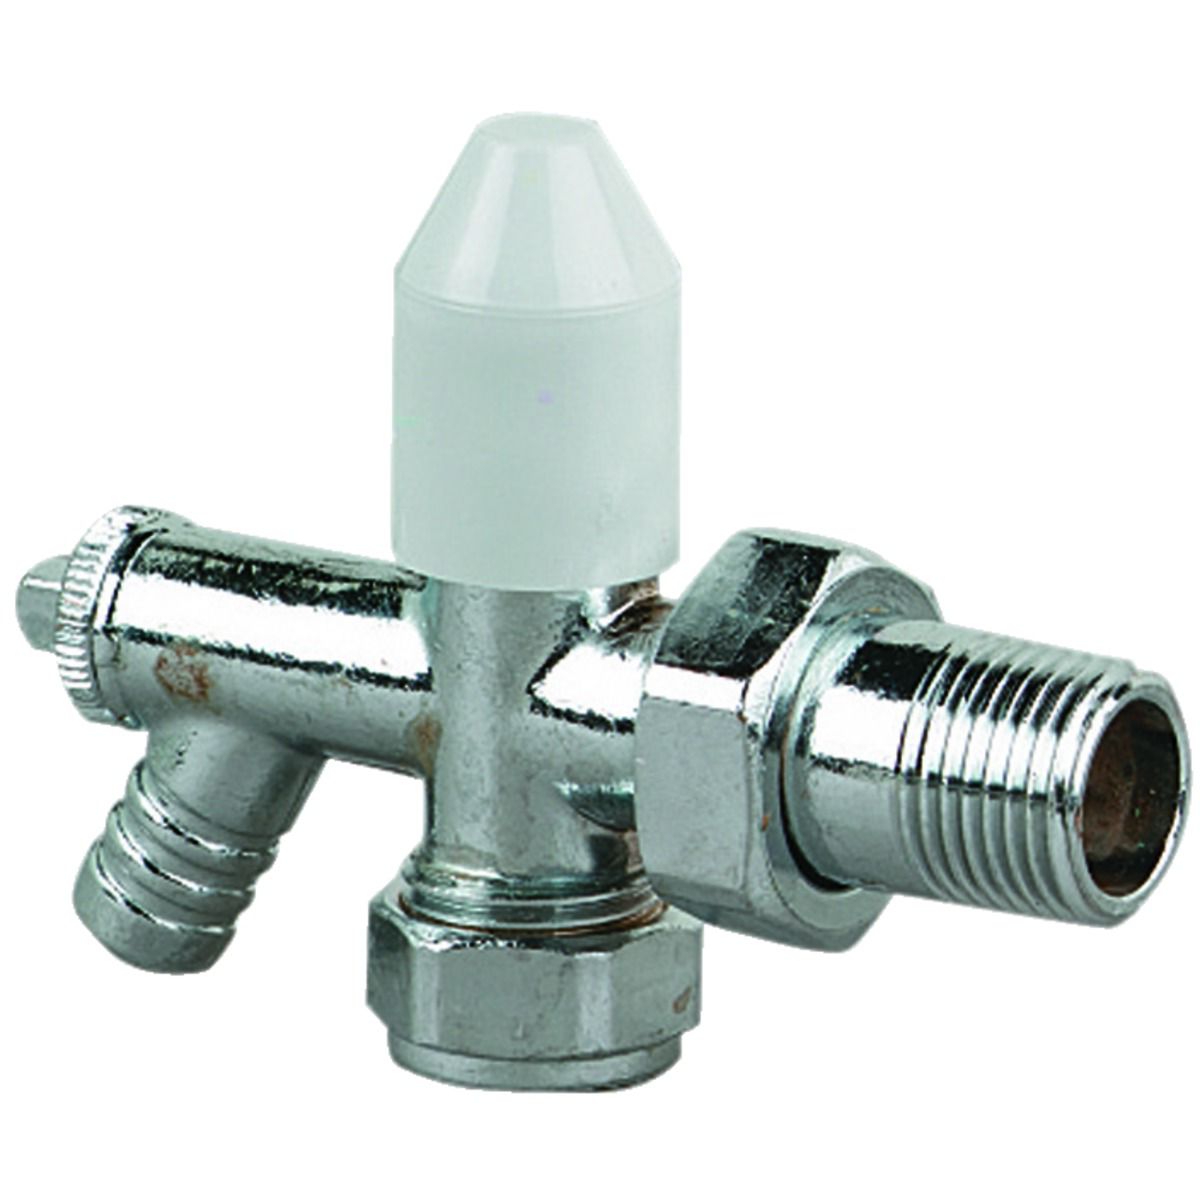 Image of Primaflow 15mm Thermostatic Radiator Valve with Intergrated Drain Off Valve - White